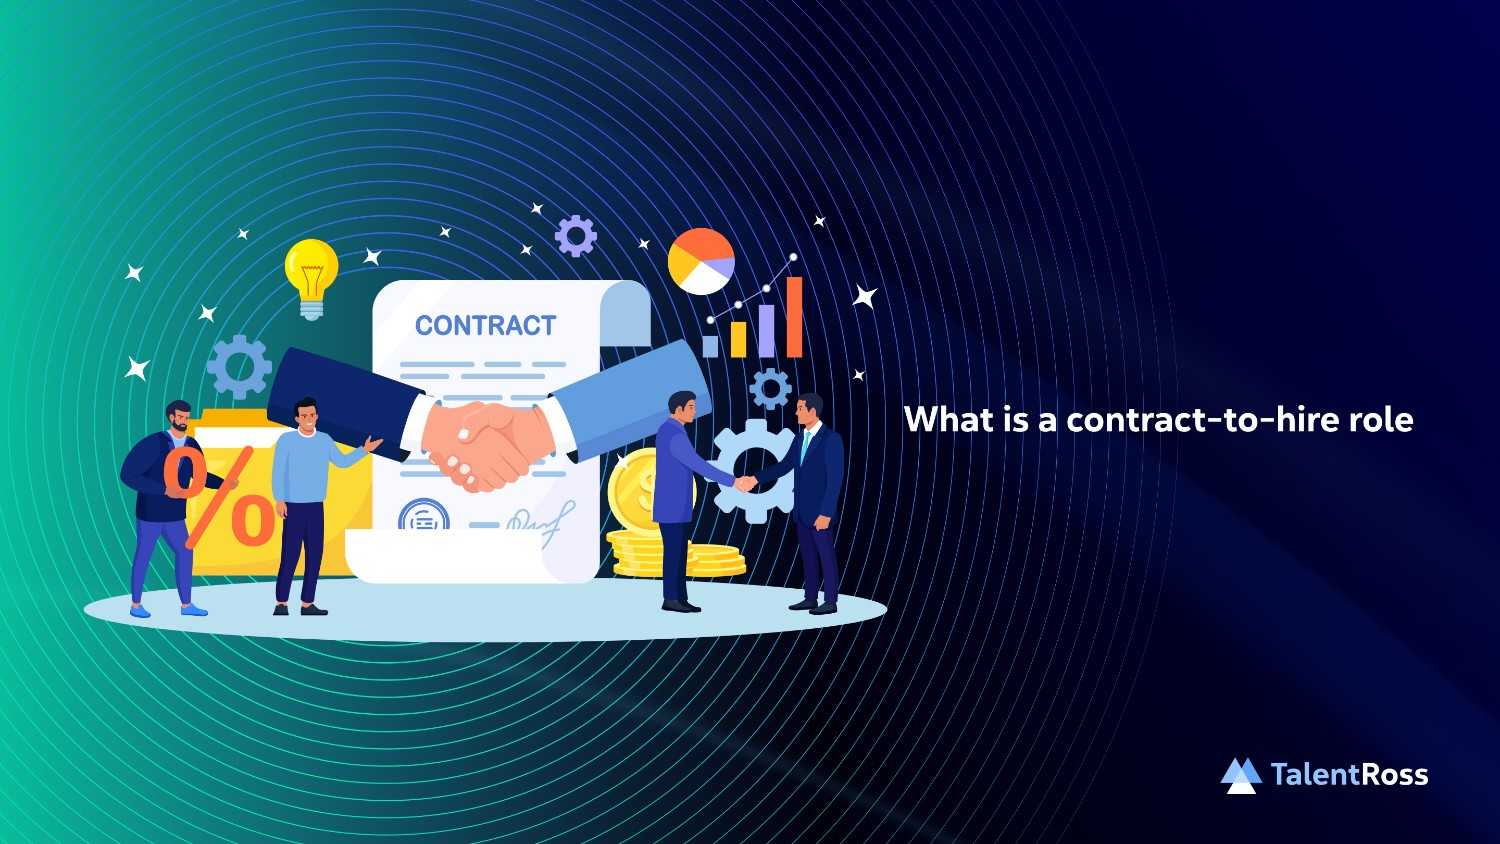 What is a contract-to-hire role